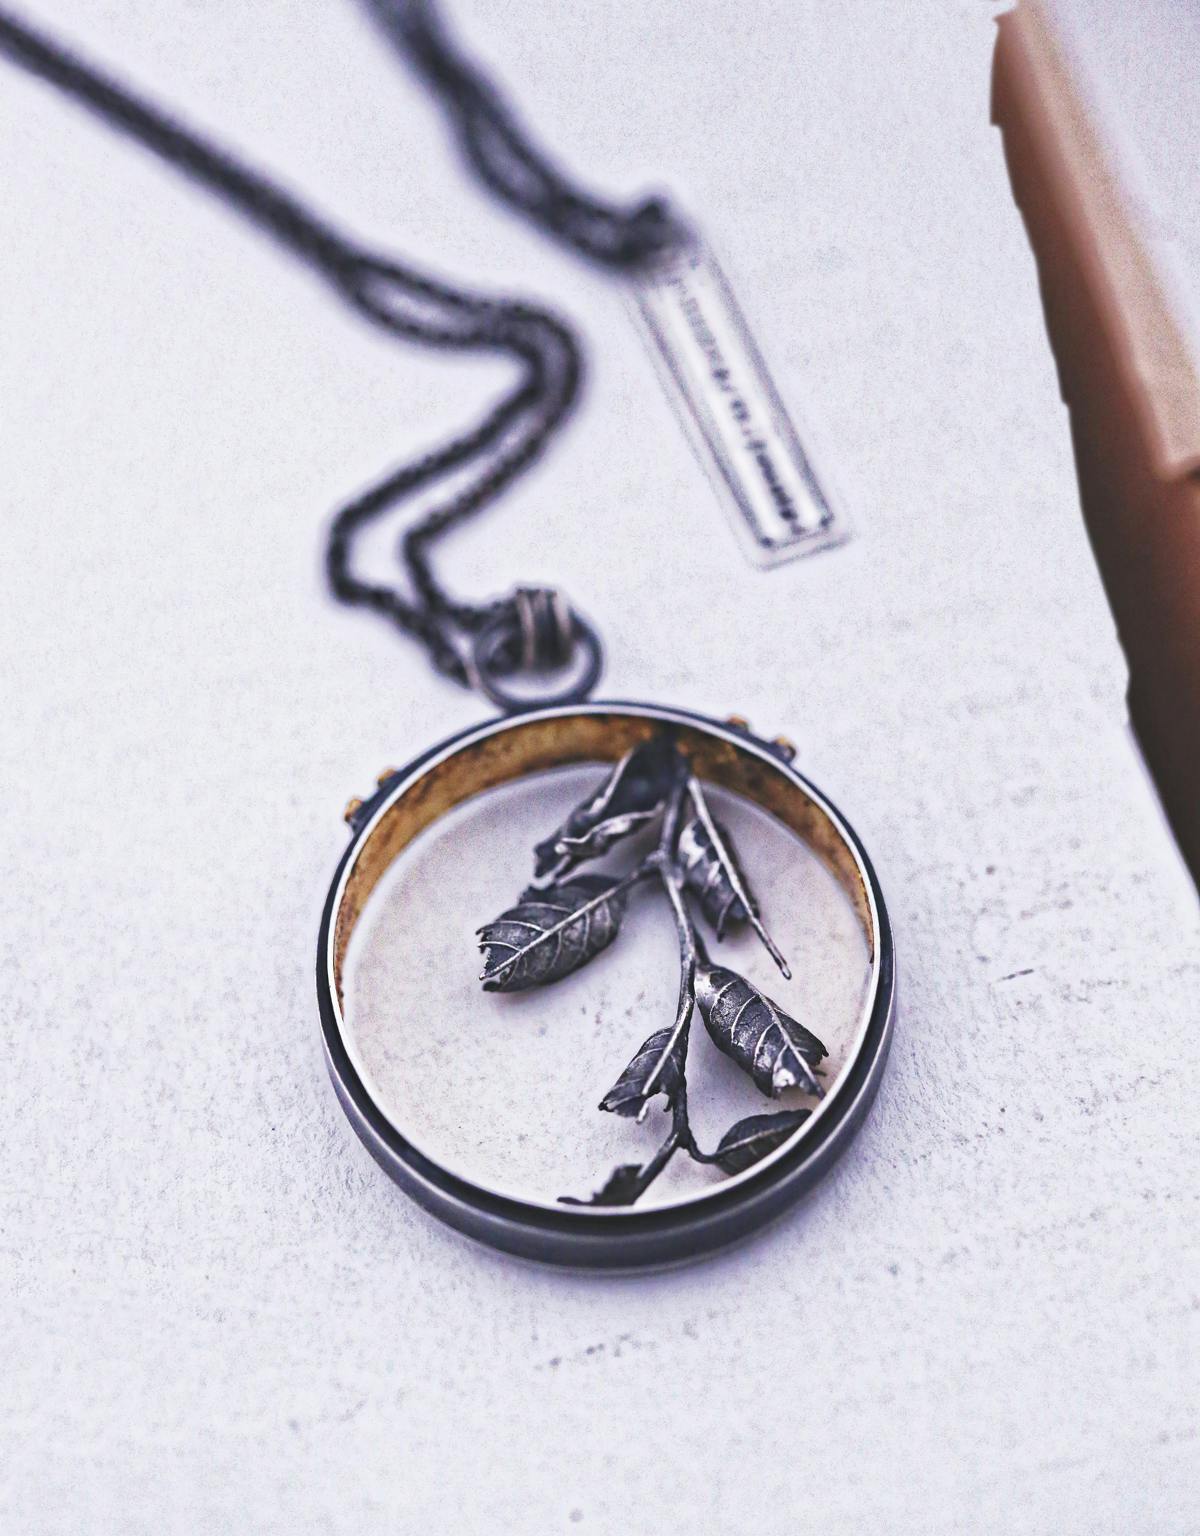 metal ring on necklace with leaf design in the middle of the ring